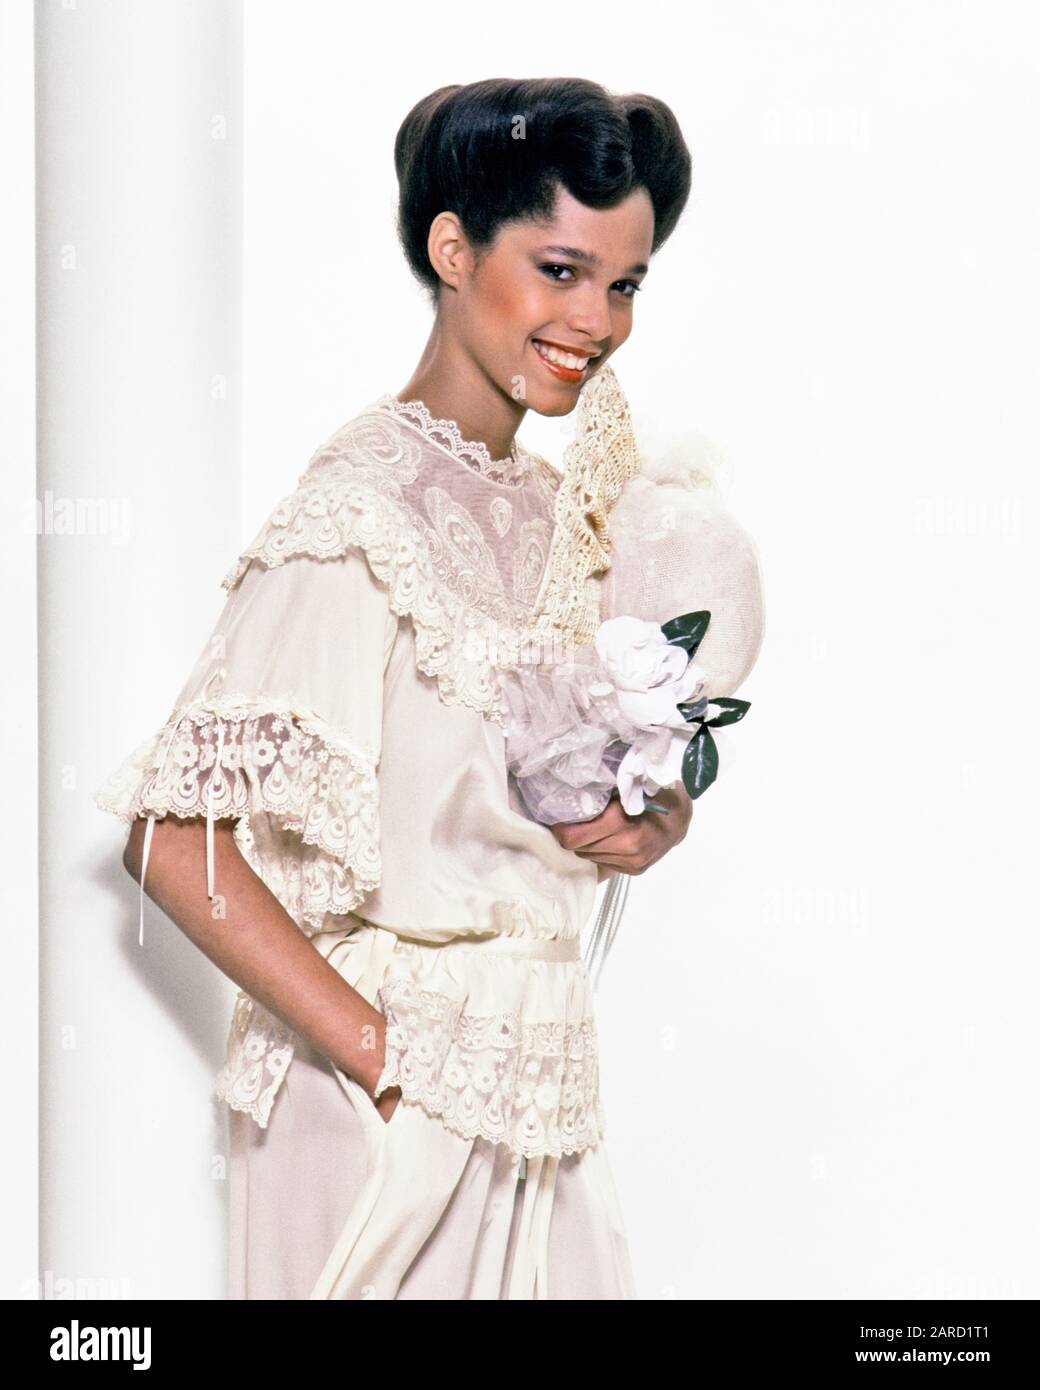 1980s 1970s SMILING AFRICAN-AMERICAN WOMAN  WEARING LACE & RUFFLE BLOUSE SKIRT HOLDING HAT WHITE CAMELLIAS LOOKING AT CAMERA - ks17840 PHT001 HARS CELEBRATION EVENT HEALTHINESS COPY SPACE HALF-LENGTH VEIL CONFIDENCE CEREMONY BRIDAL EYE CONTACT GOALS DREAMS HAPPINESS CHEERFUL BRIDES STYLES CUSTOM AFRICAN-AMERICANS AFRICAN-AMERICAN AND EXCITEMENT TRADITION OCCASION BLACK ETHNICITY PRIDE BLOUSE OCCUPATIONS POSING SMILES CONNECTION CONCEPTUAL JOYFUL RUFFLE STYLISH MAID OF HONOR MODELLING FASHIONS MODELING POSE YOUNG ADULT WOMAN OLD FASHIONED AFRICAN AMERICANS Stock Photo